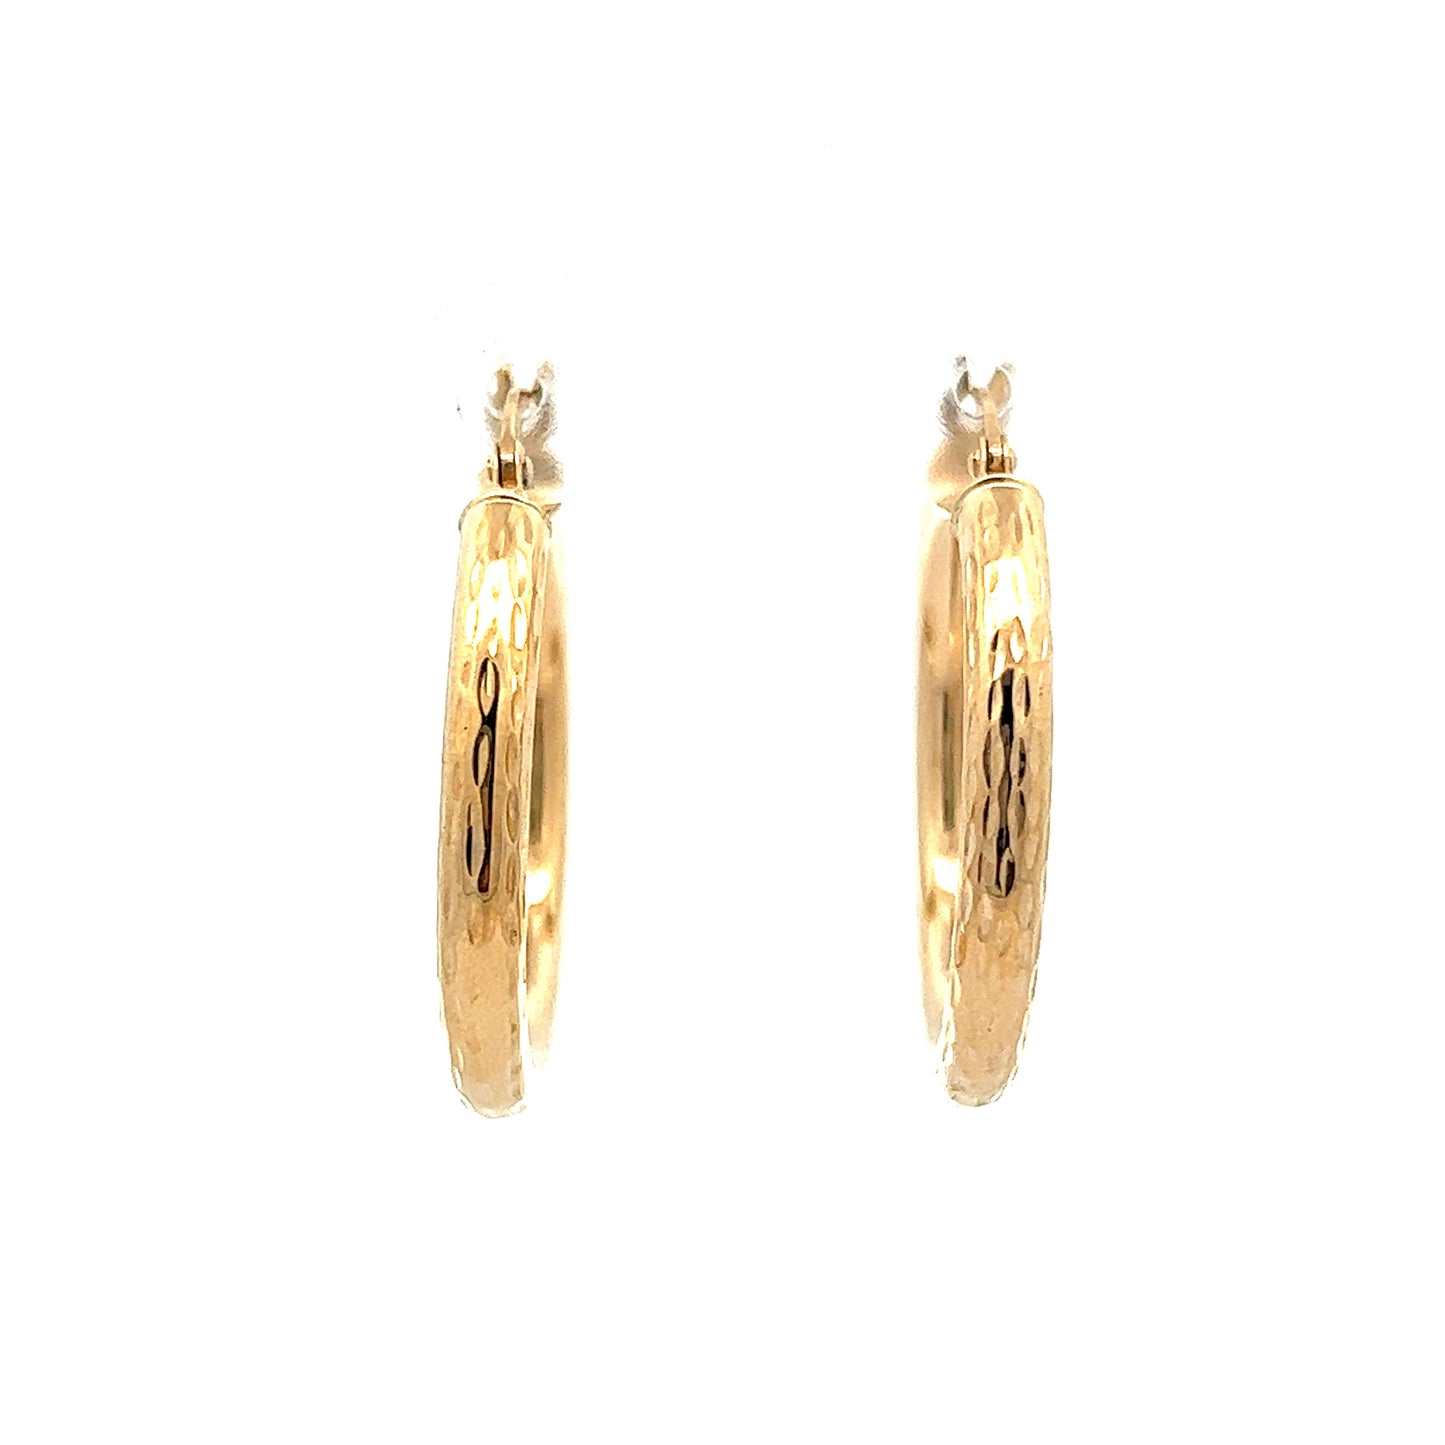 Dimpled Earring Hoops in 14k Yellow Gold